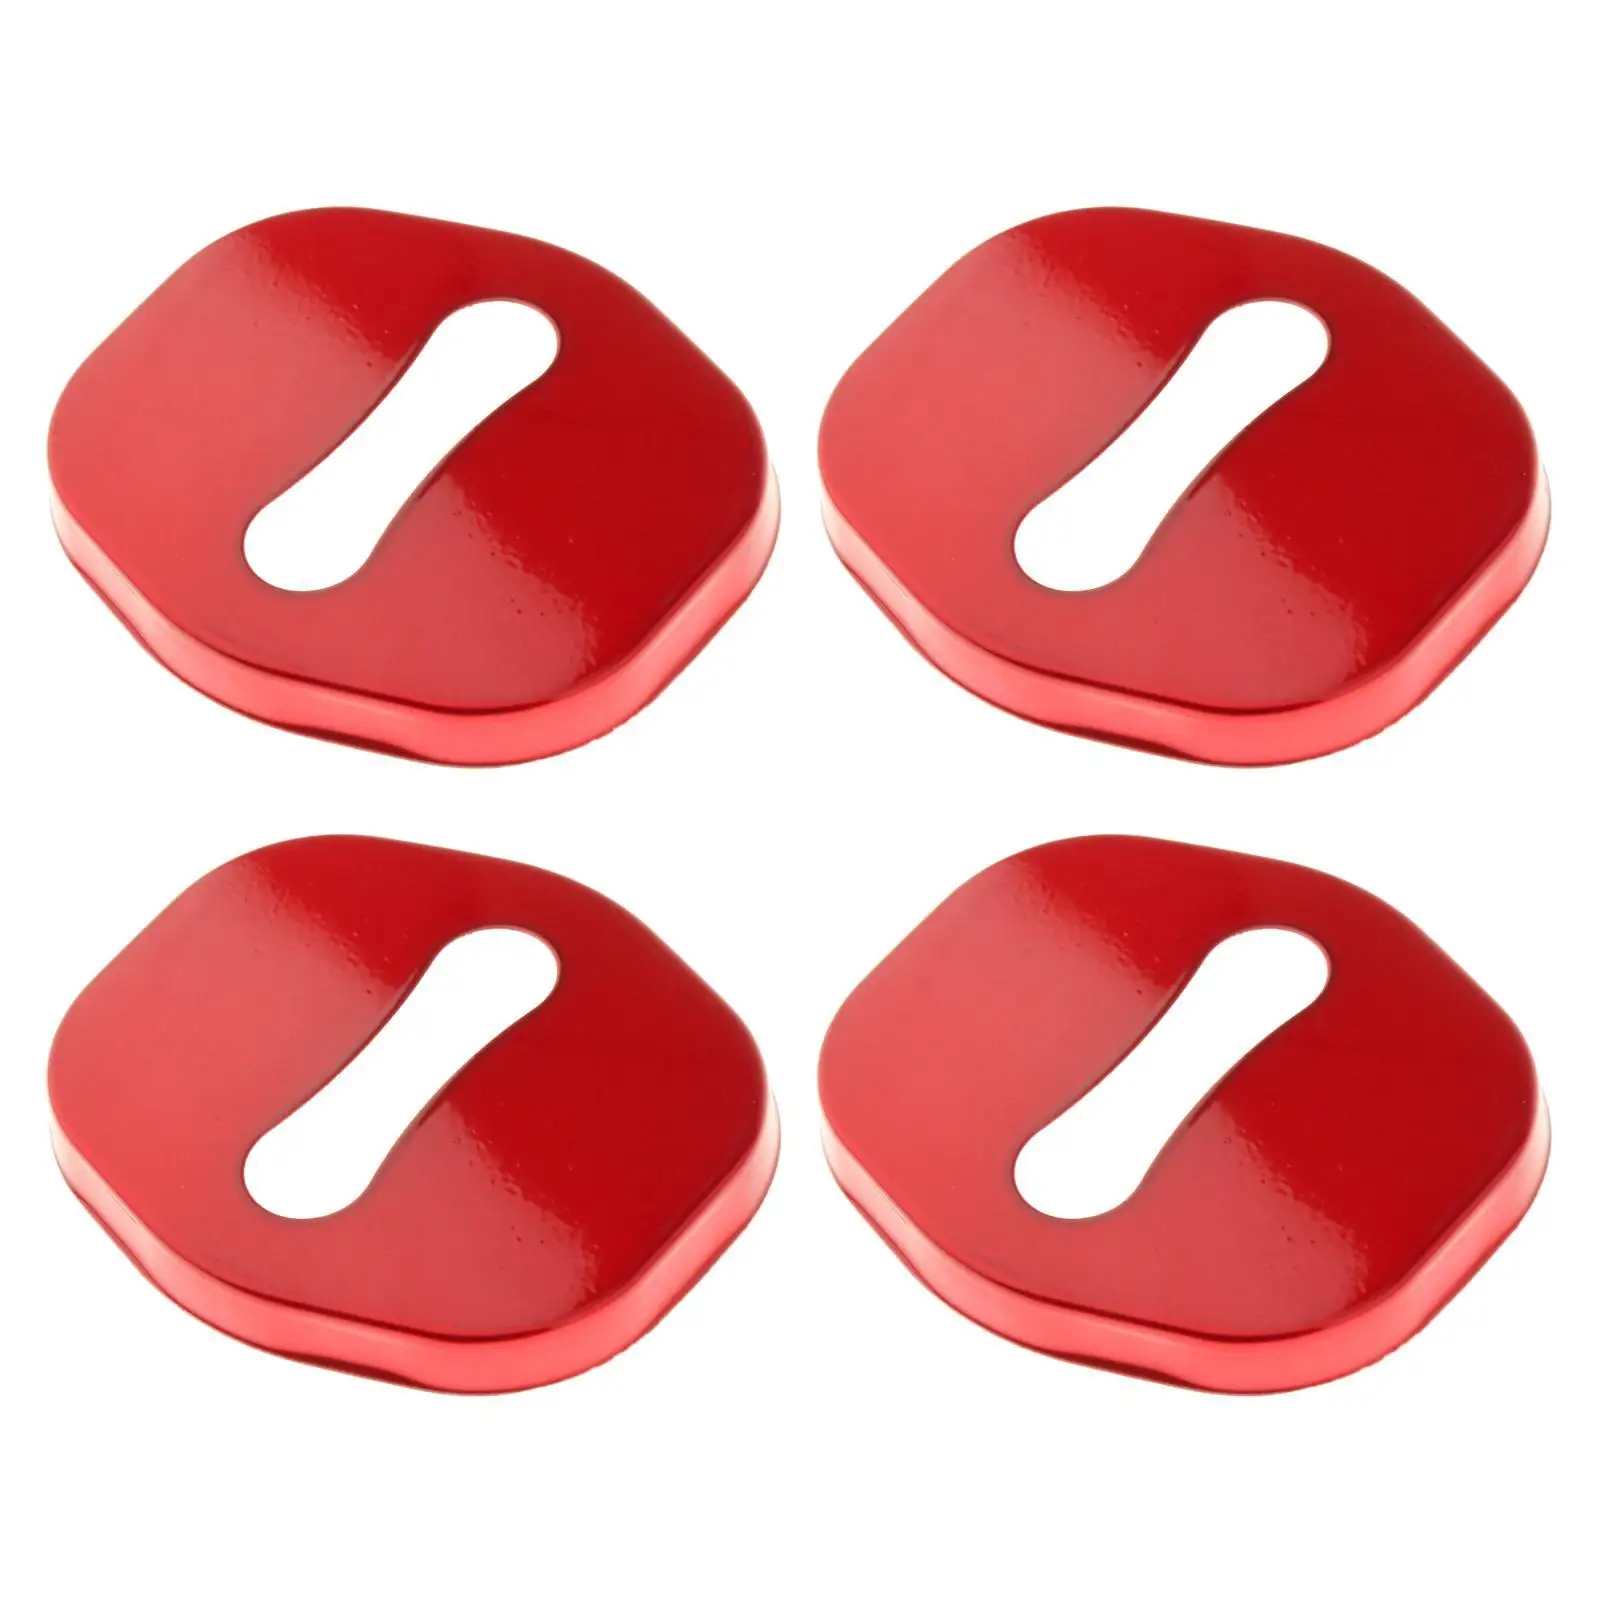 4Pcs Stainless Steel Car Door Lock latches Cover Protector Metal Trim Interior for Auto